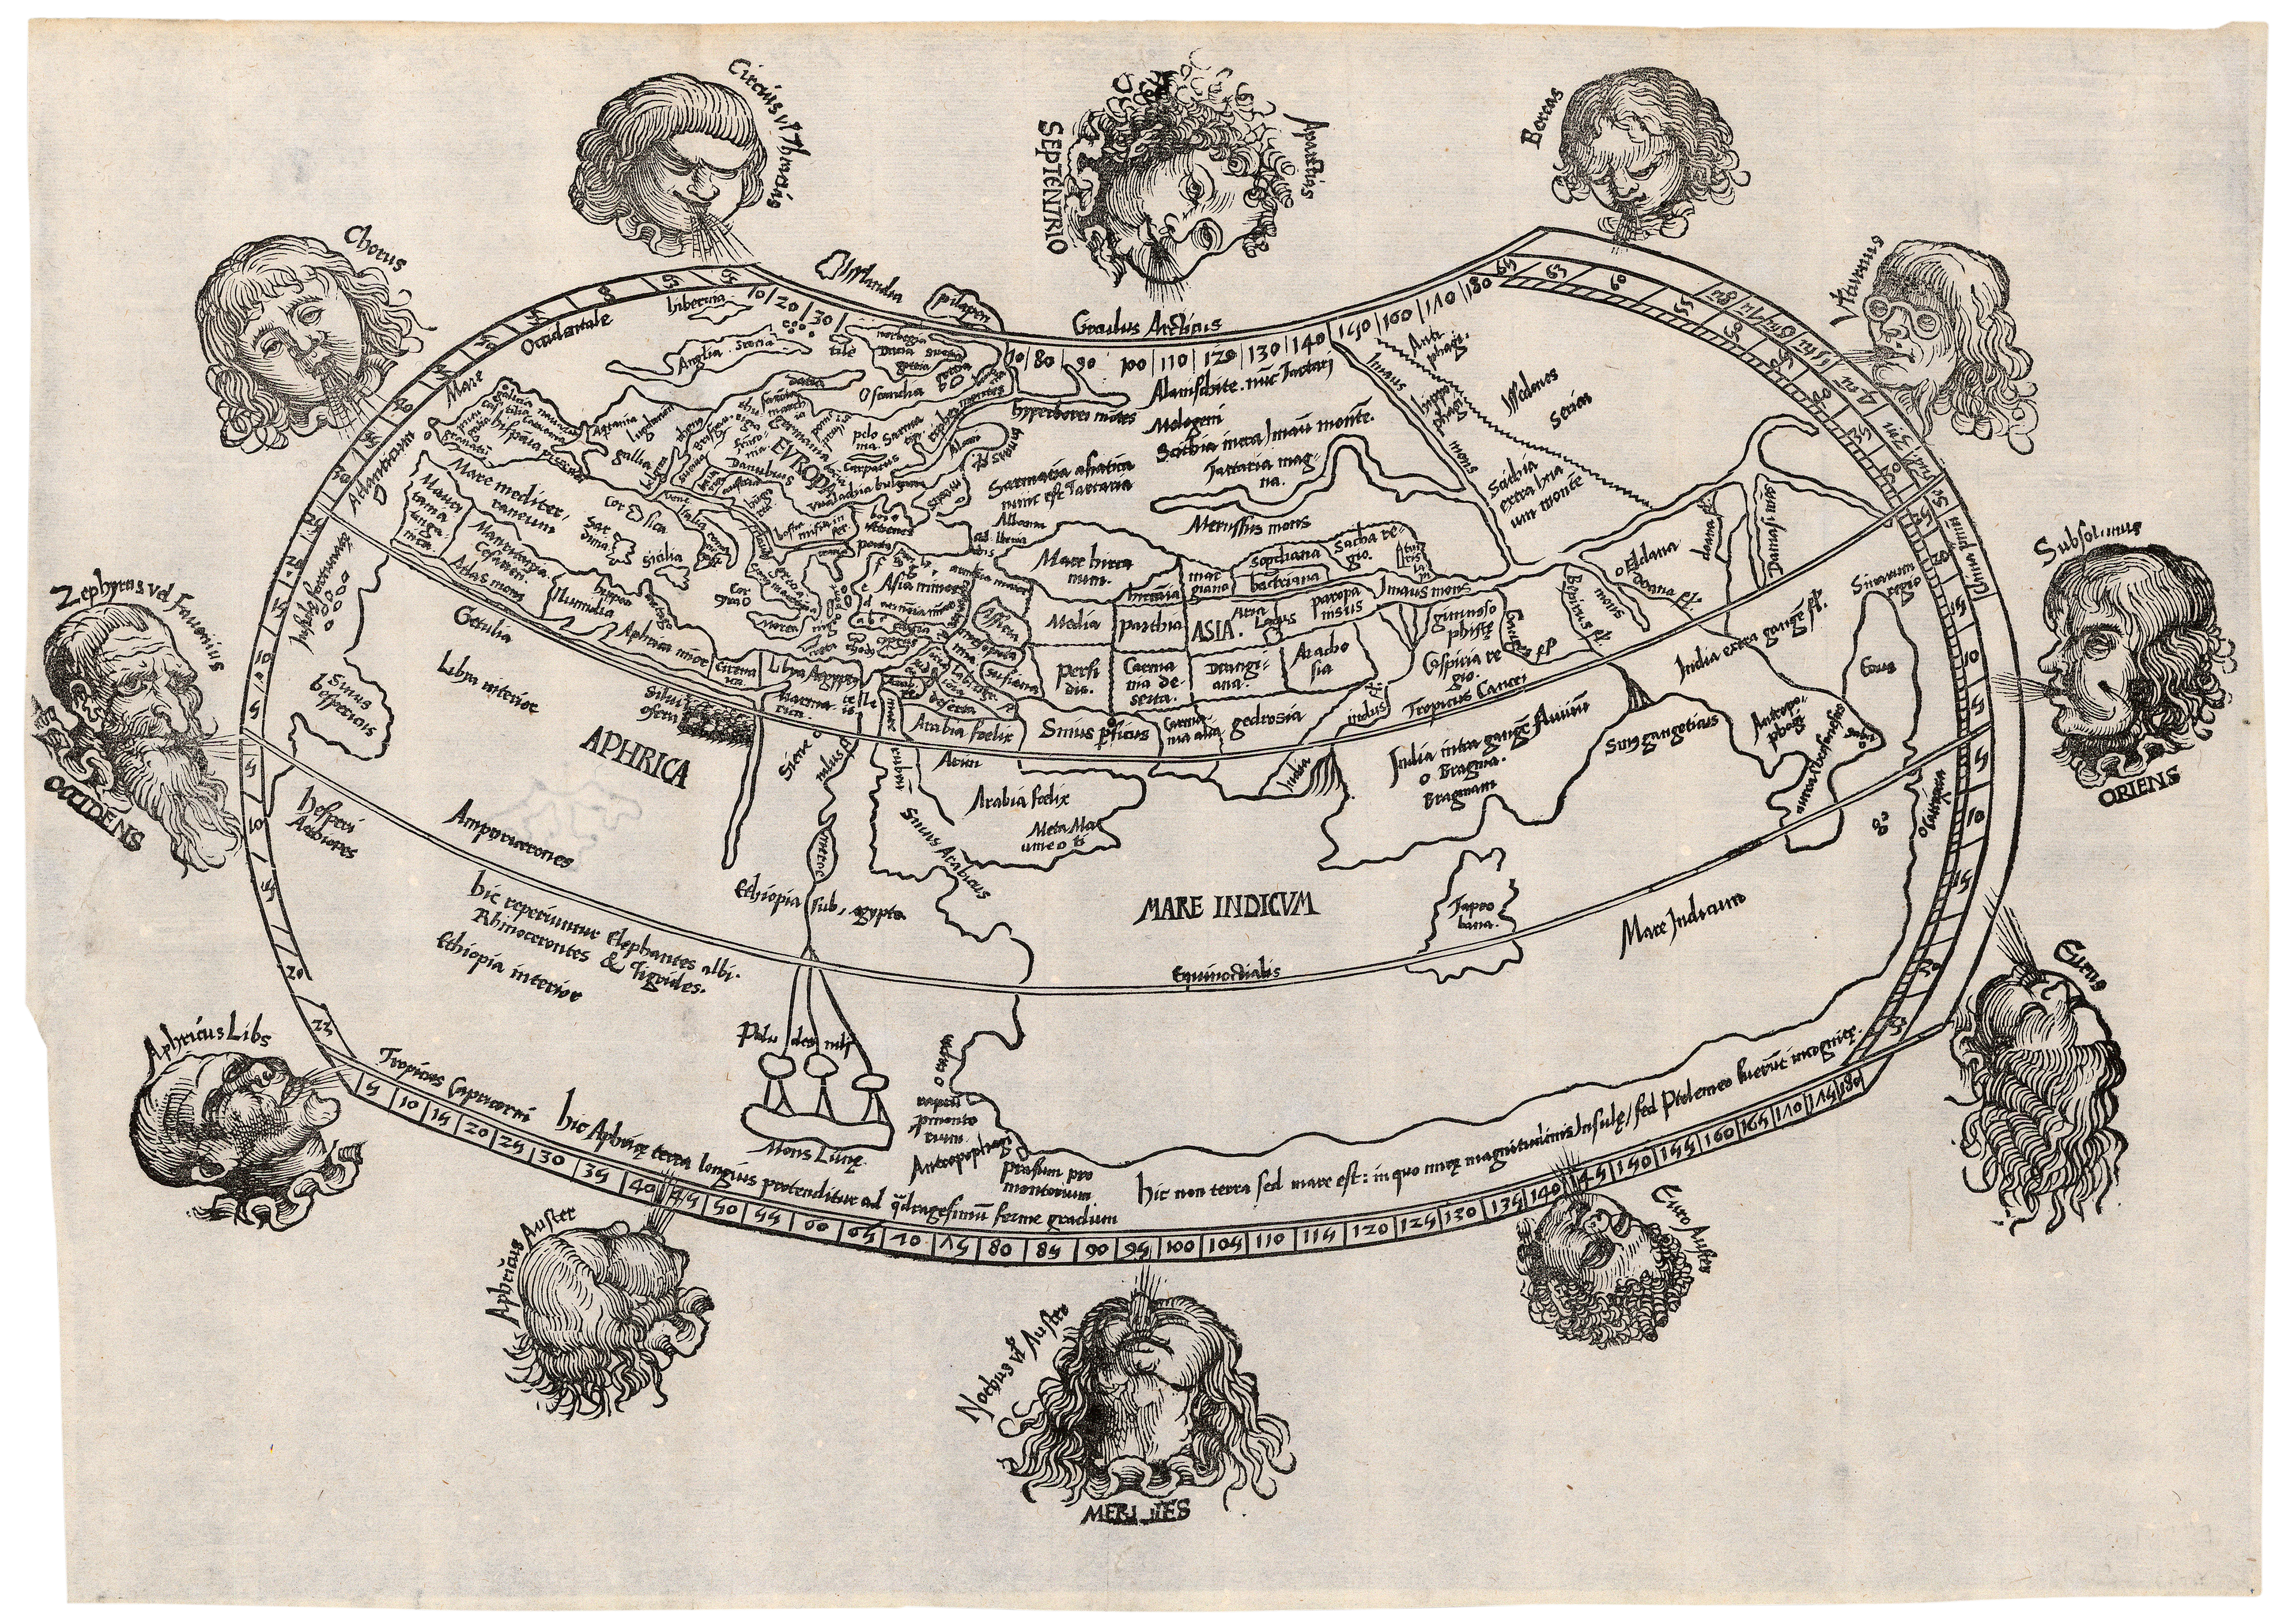 Example of a woodcut featuring the Reisch map with windheads. A black and white print of the world on a Ptolemaic projection, with unique windheads and their names shown around the eds of the map. The woodcut image is clean, clear and simple.